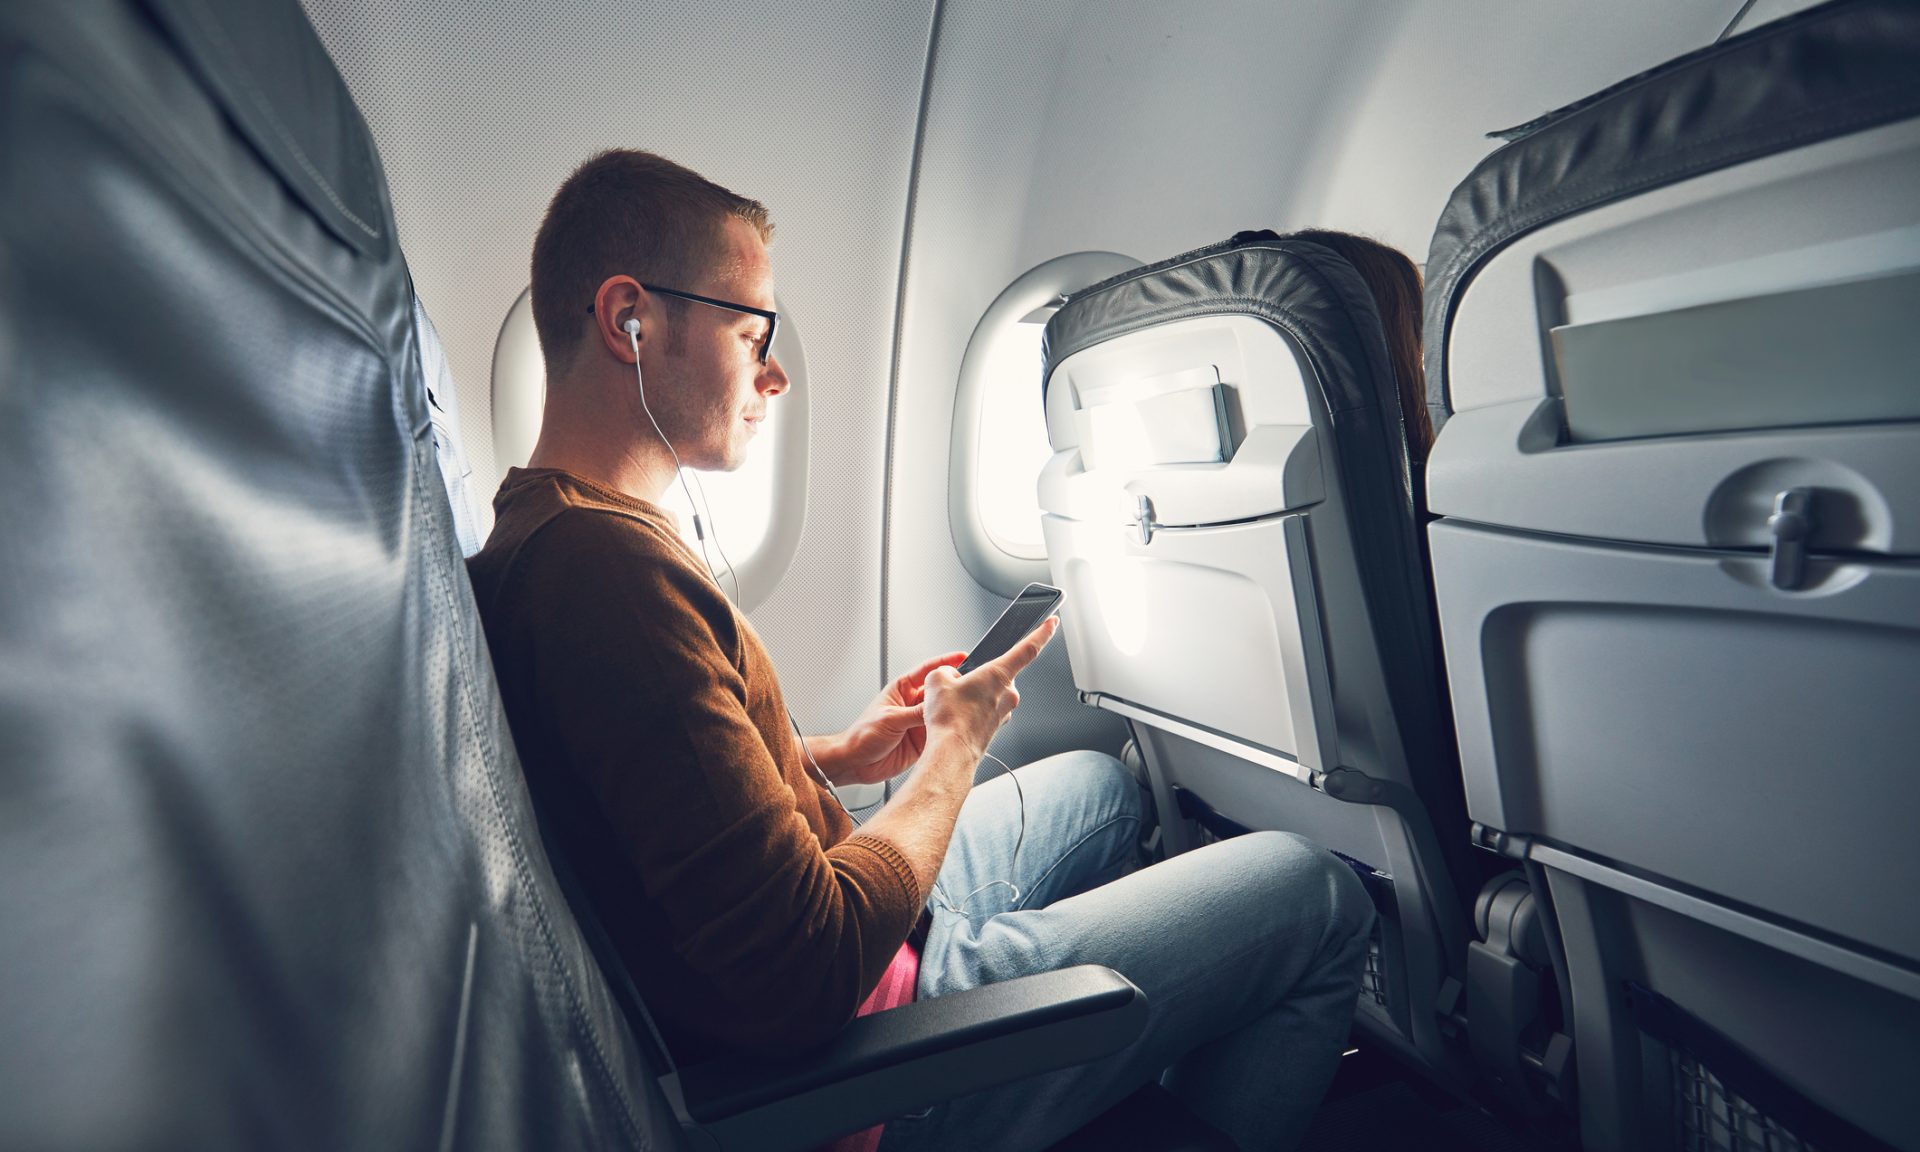 How to Send and Receive Text Messages on a Flight - NerdWallet